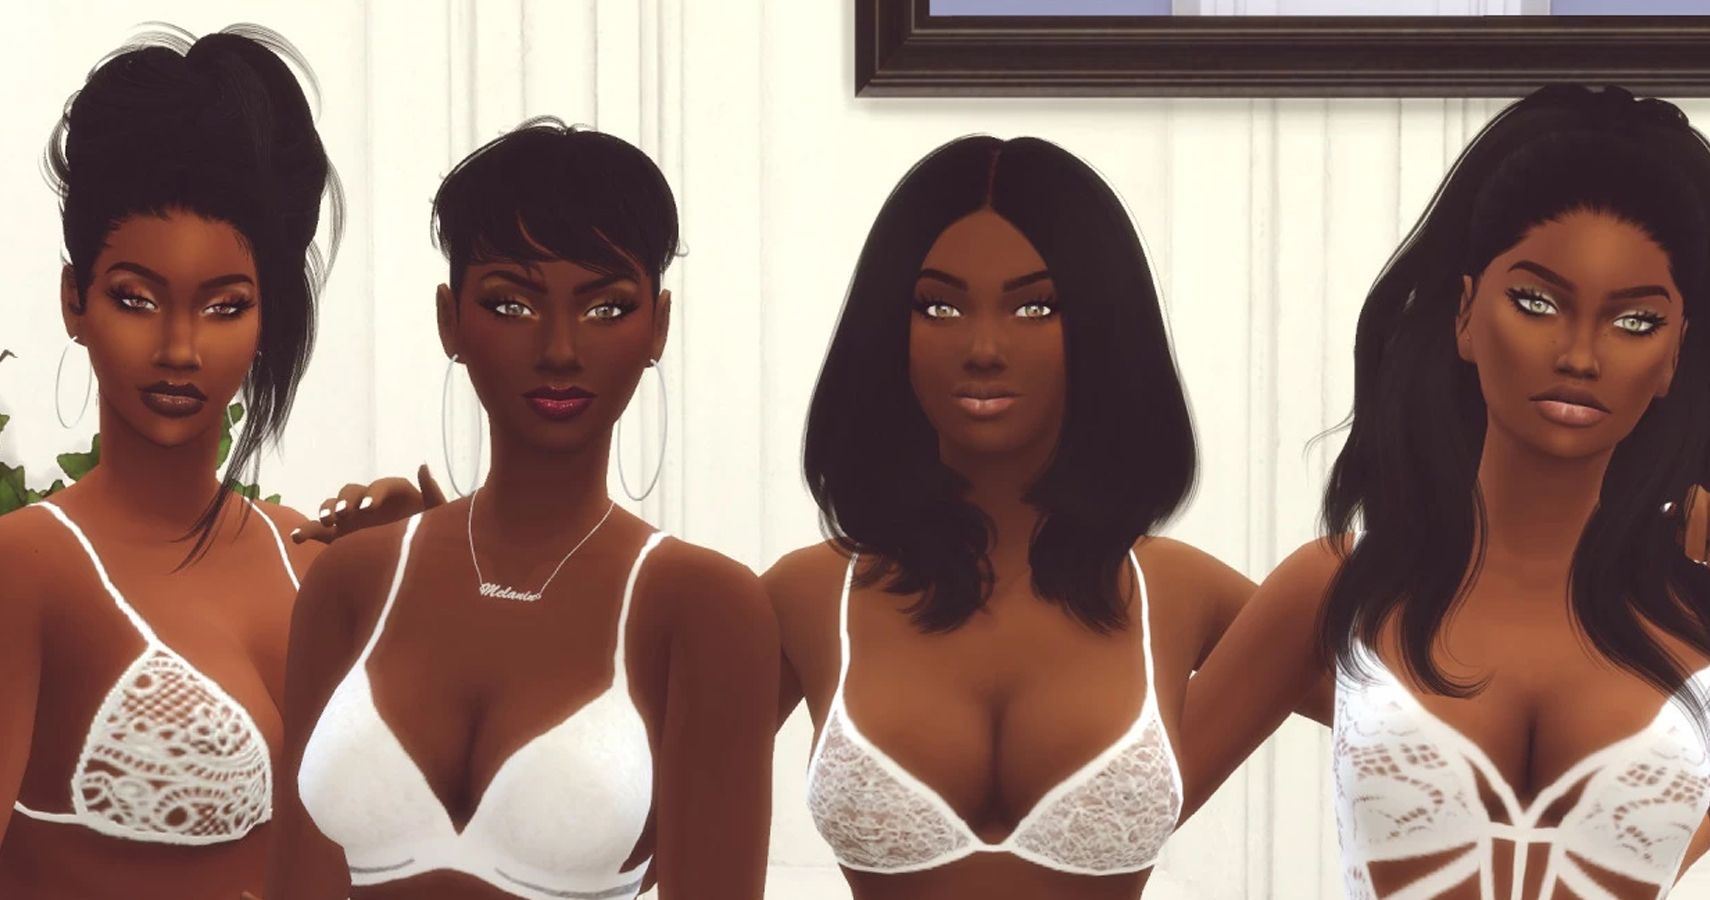 Four black sims in white bras. Show from chest upward.